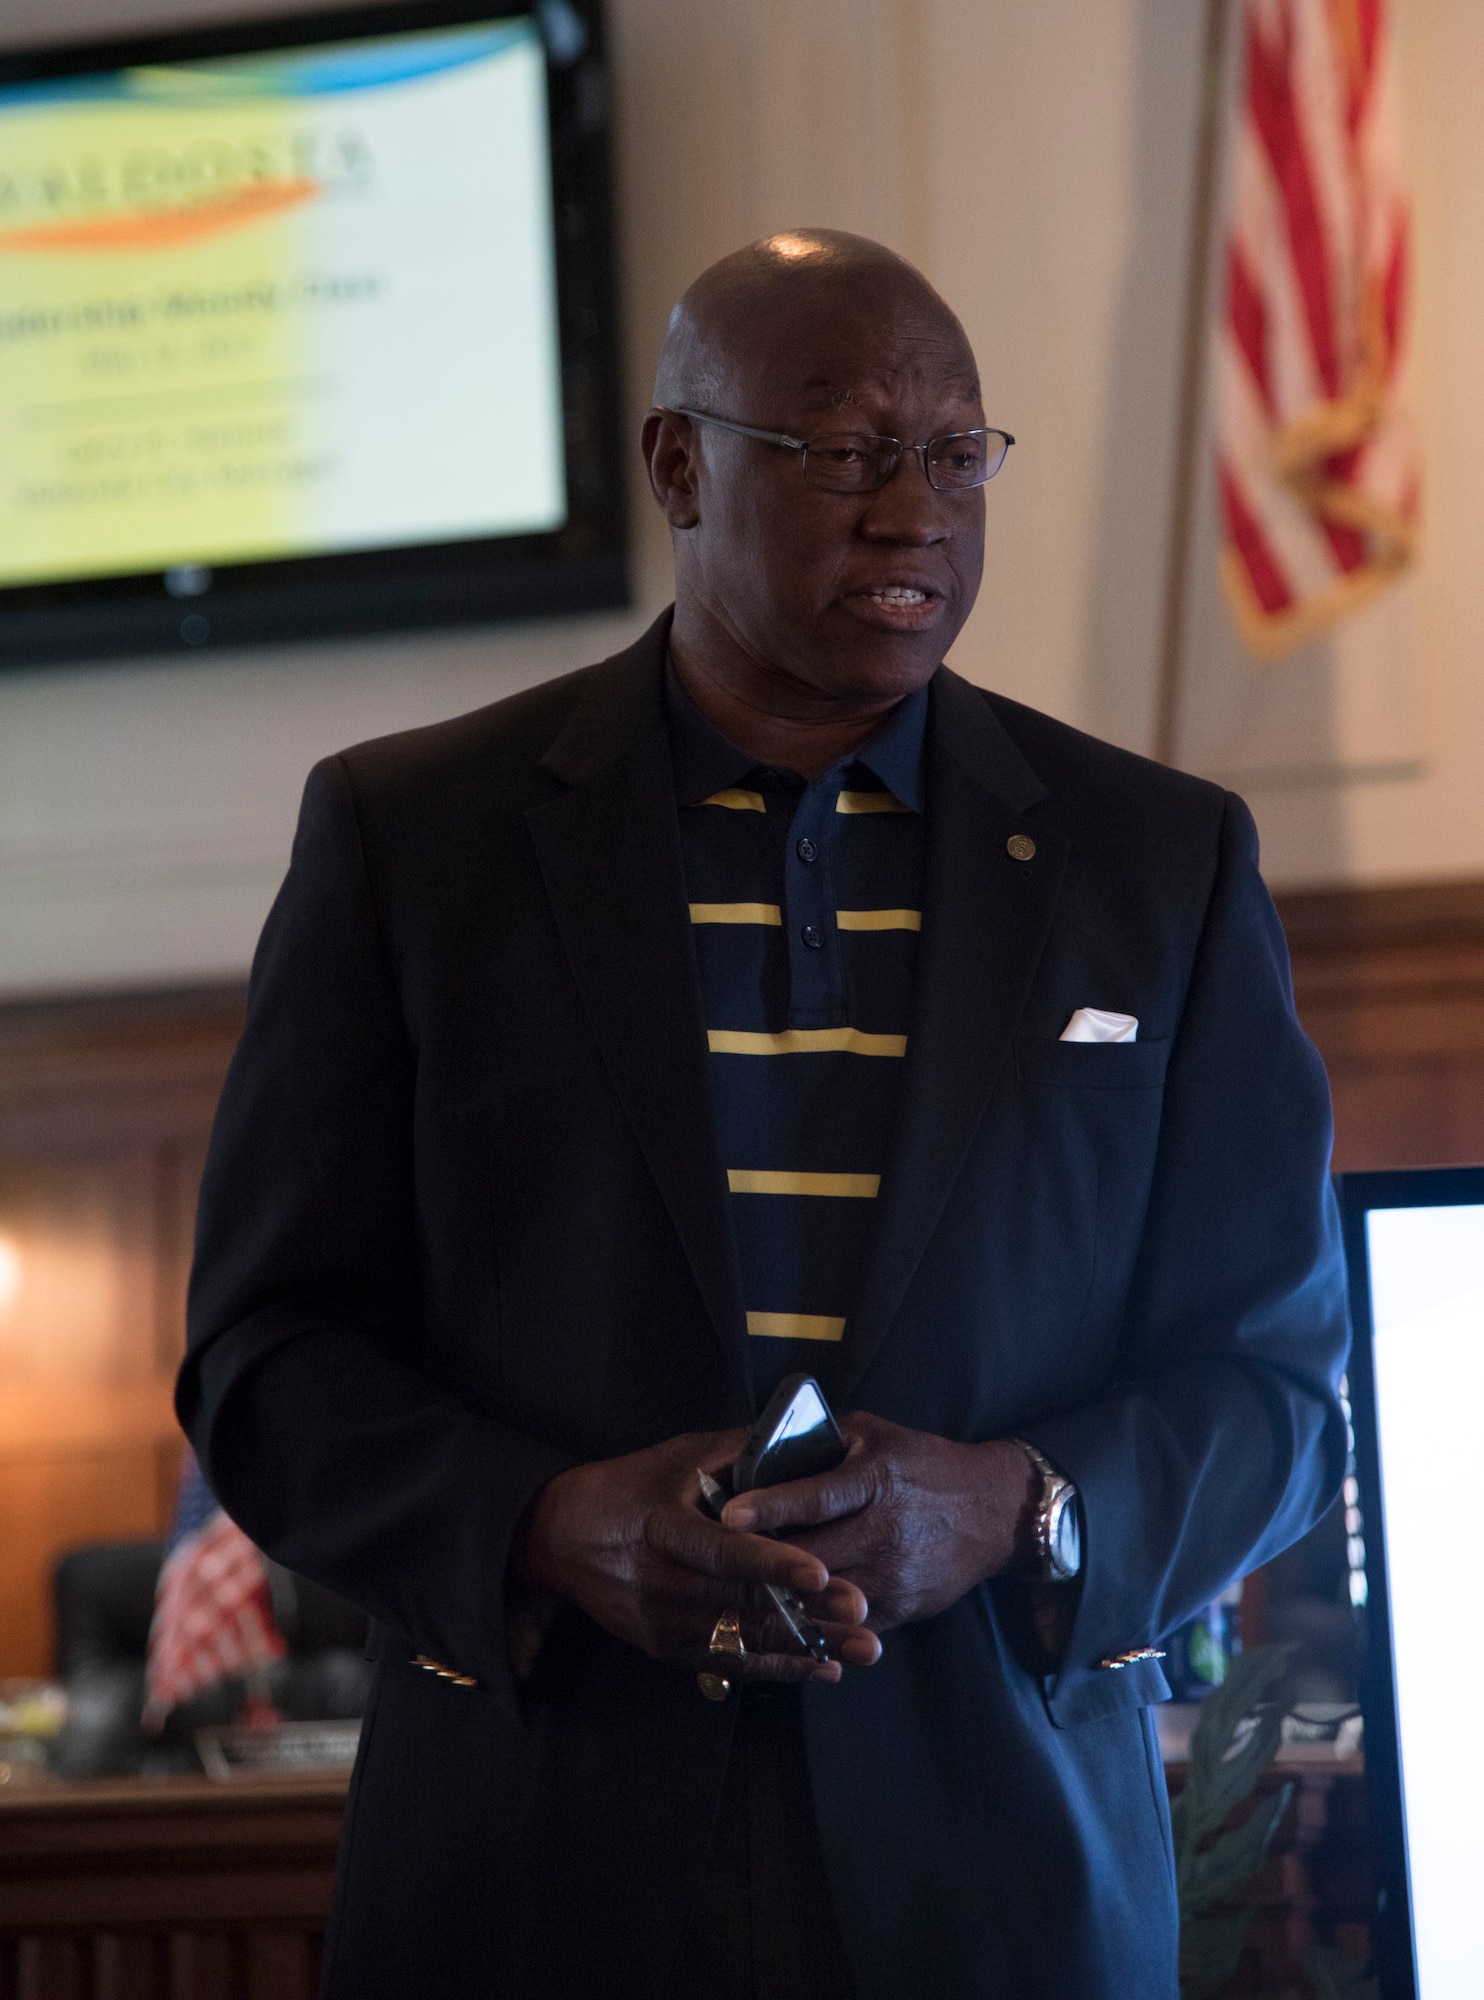 Mayor Pro Tem, Alvin Payton, for the city of Valdosta, Ga., speaks with members from Leadership Moody about the role city councilmen play in local government, May 12th, 2017, at Valdosta City Hall. Leadership Moody is a development leadership program at Moody Air Force Base where selected Senior Non-Commissioned Officers, Field Grade Officers, and civilians gain leadership insights from local area leaders in government, education or other community agencies. (U.S. Air Force Photo by Capt. Korey Fratini)